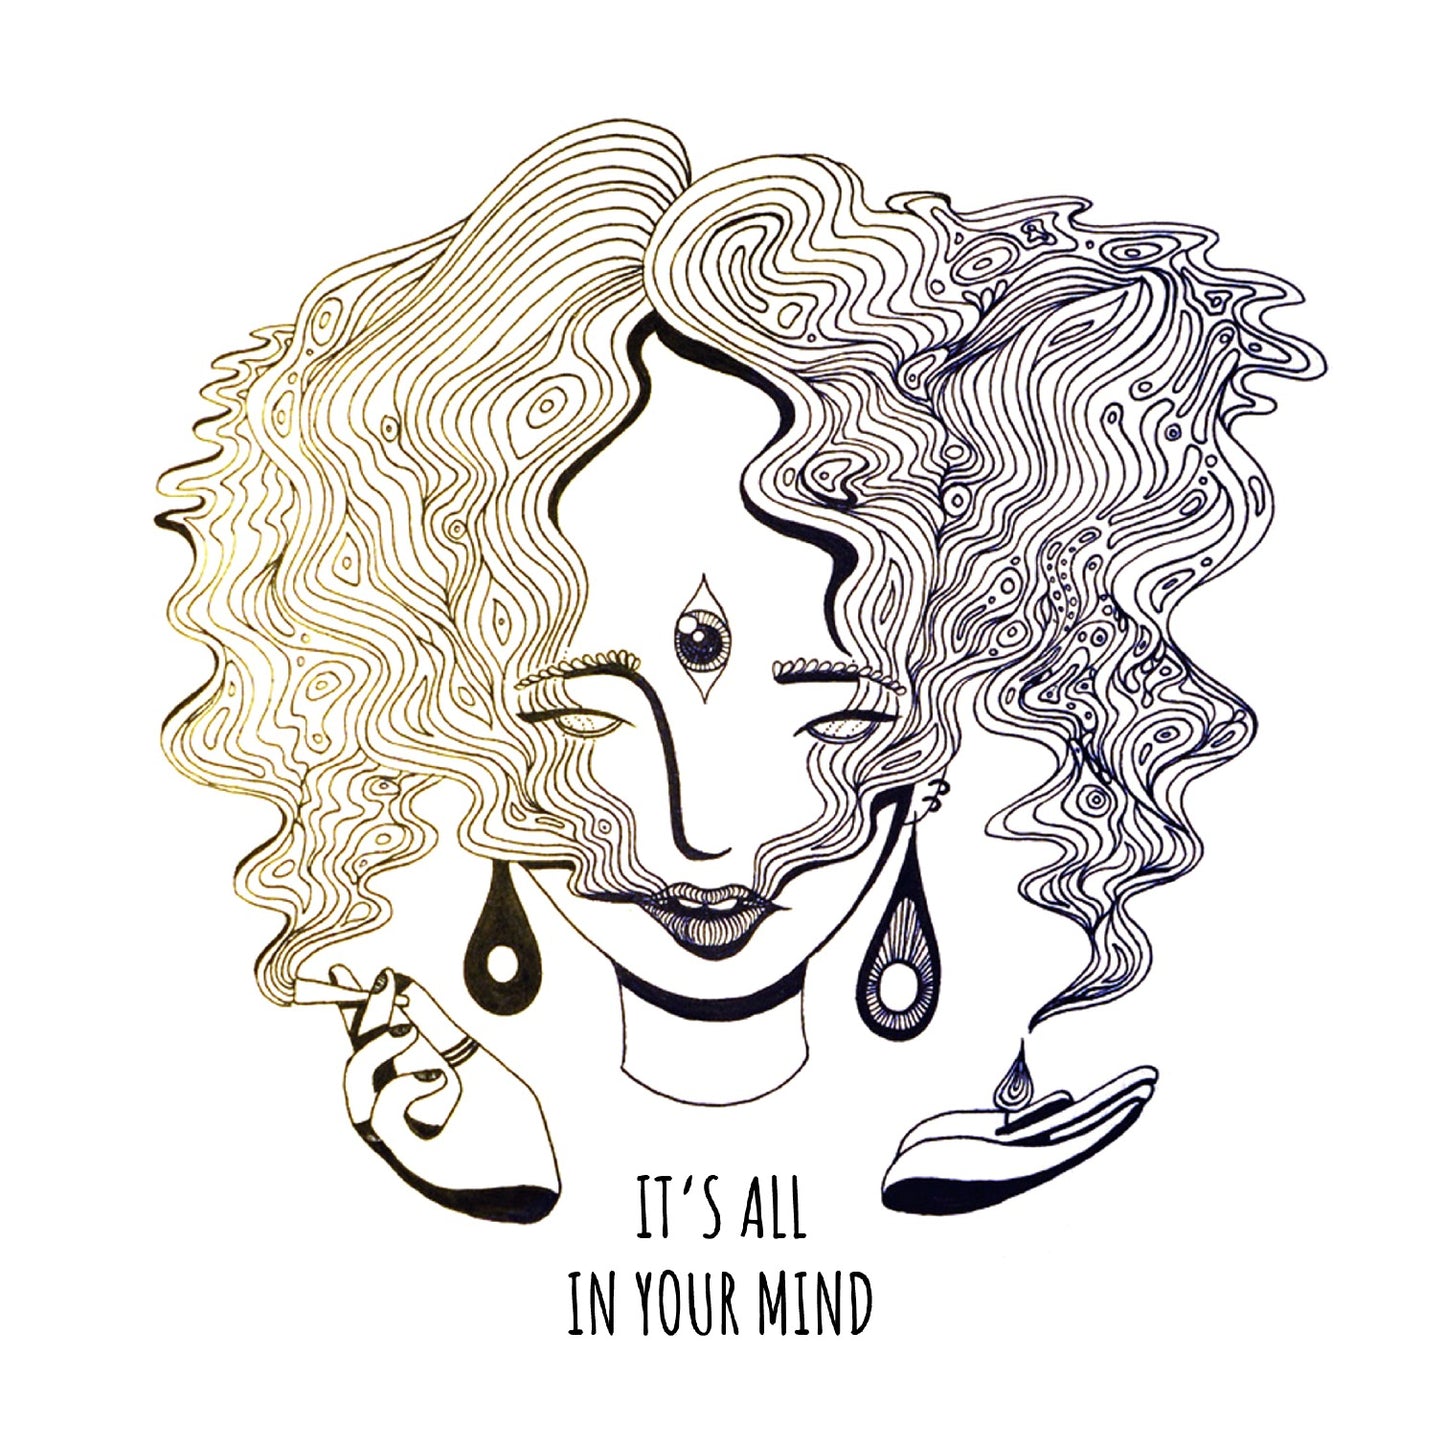 "IN YOUR MIND" PRINT